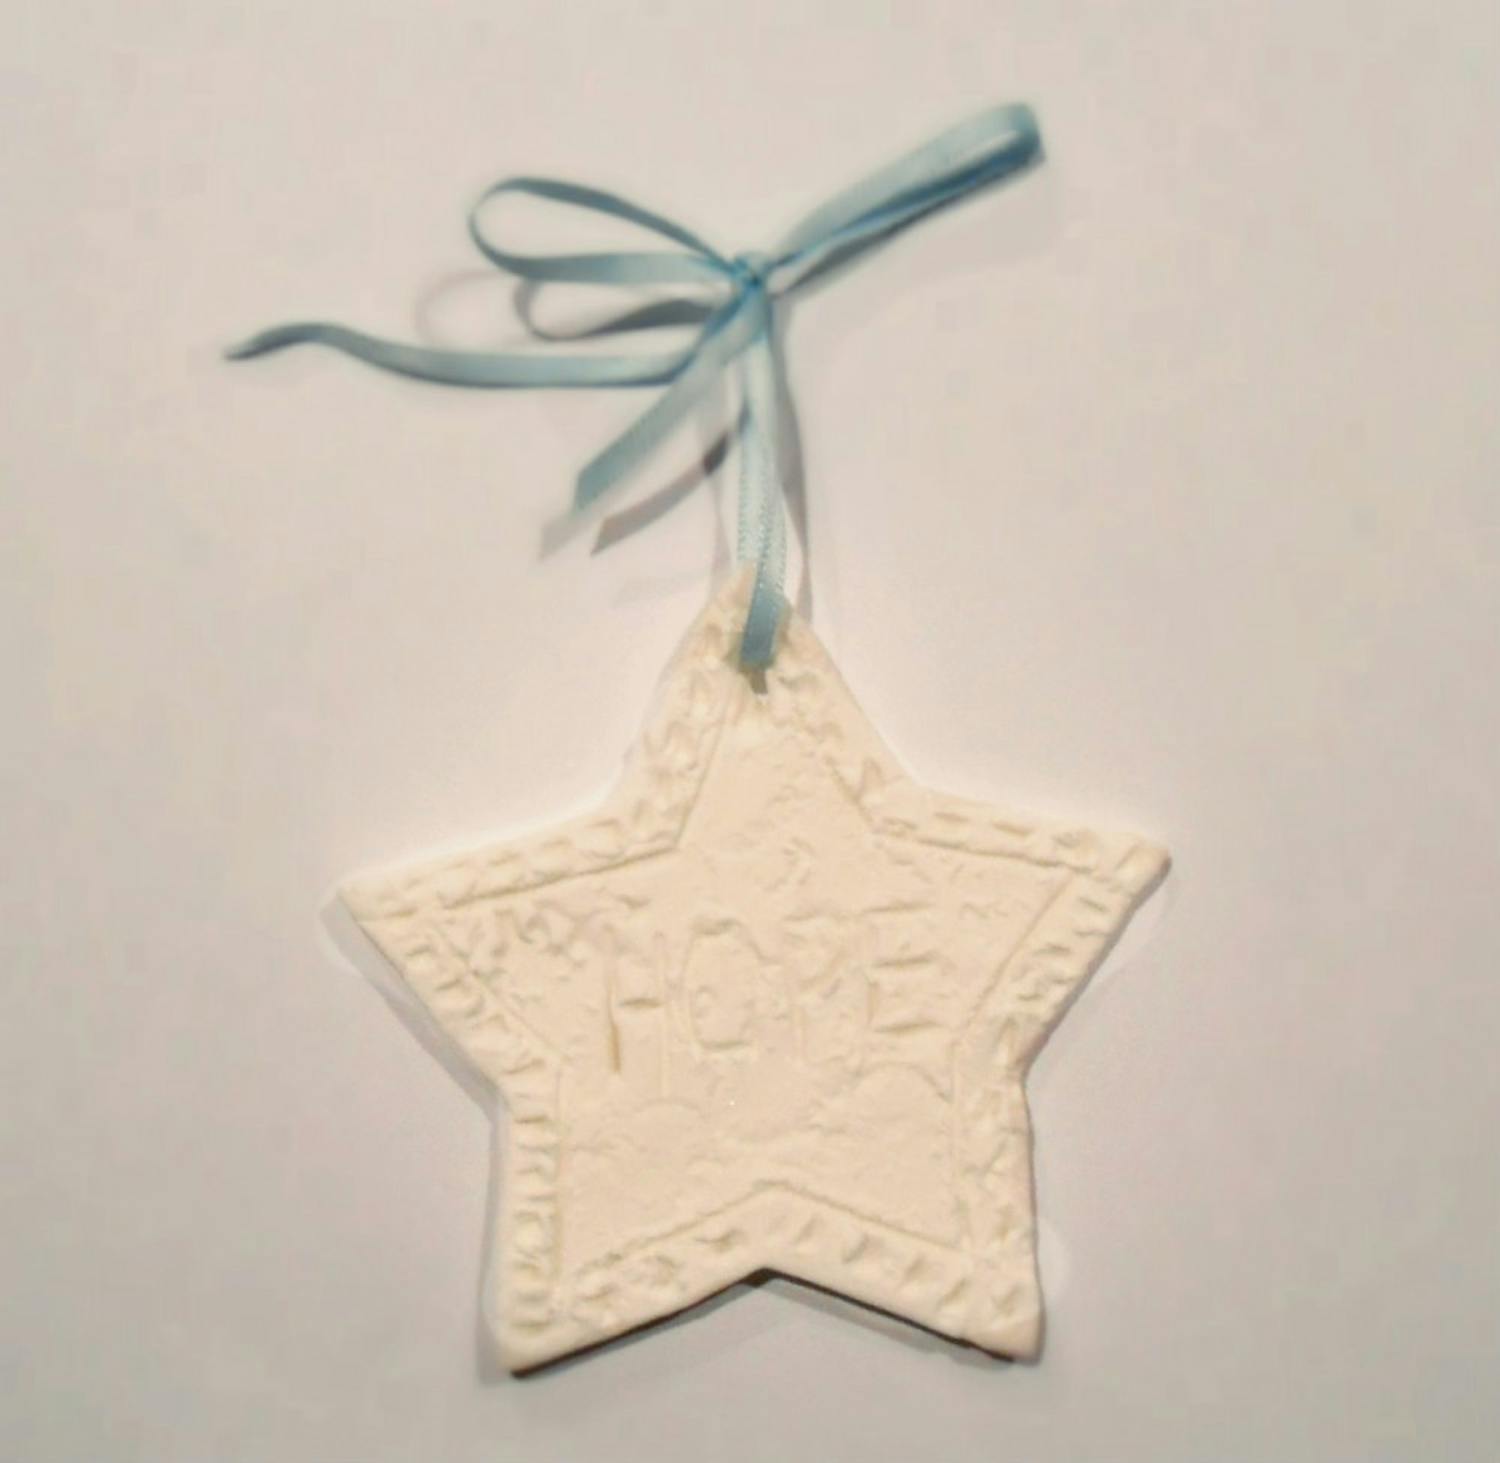 	With a few kitchen and crafting supplies, you can easily create your own edible Christmas ornament.